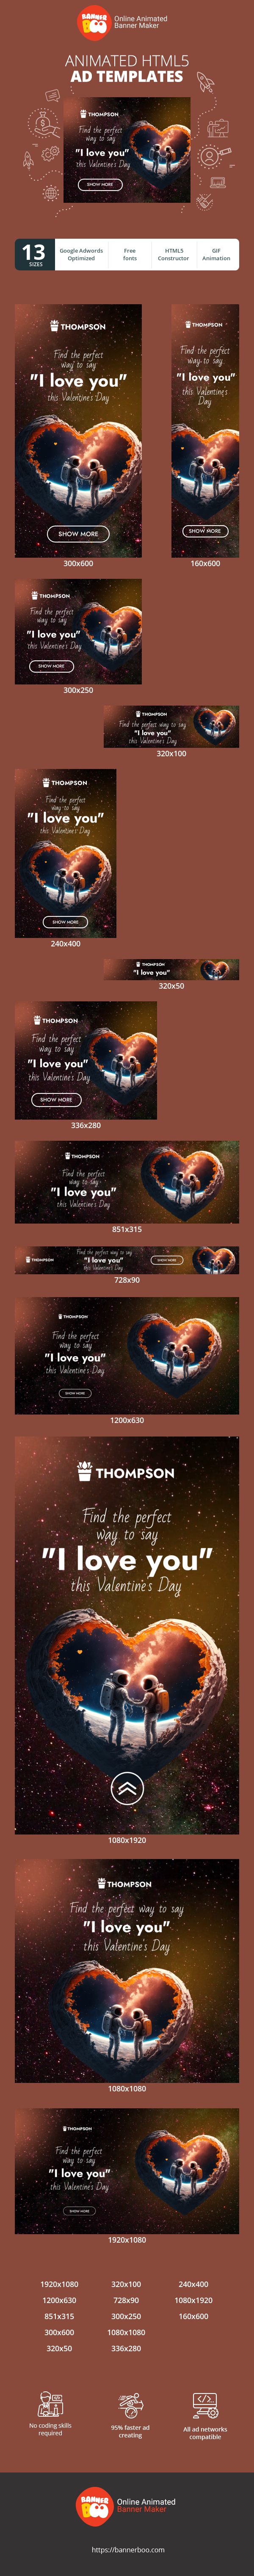 Banner ad template — Find The Perfect Way To Say "I Love You" This Valentine's Day — Valentine's Day